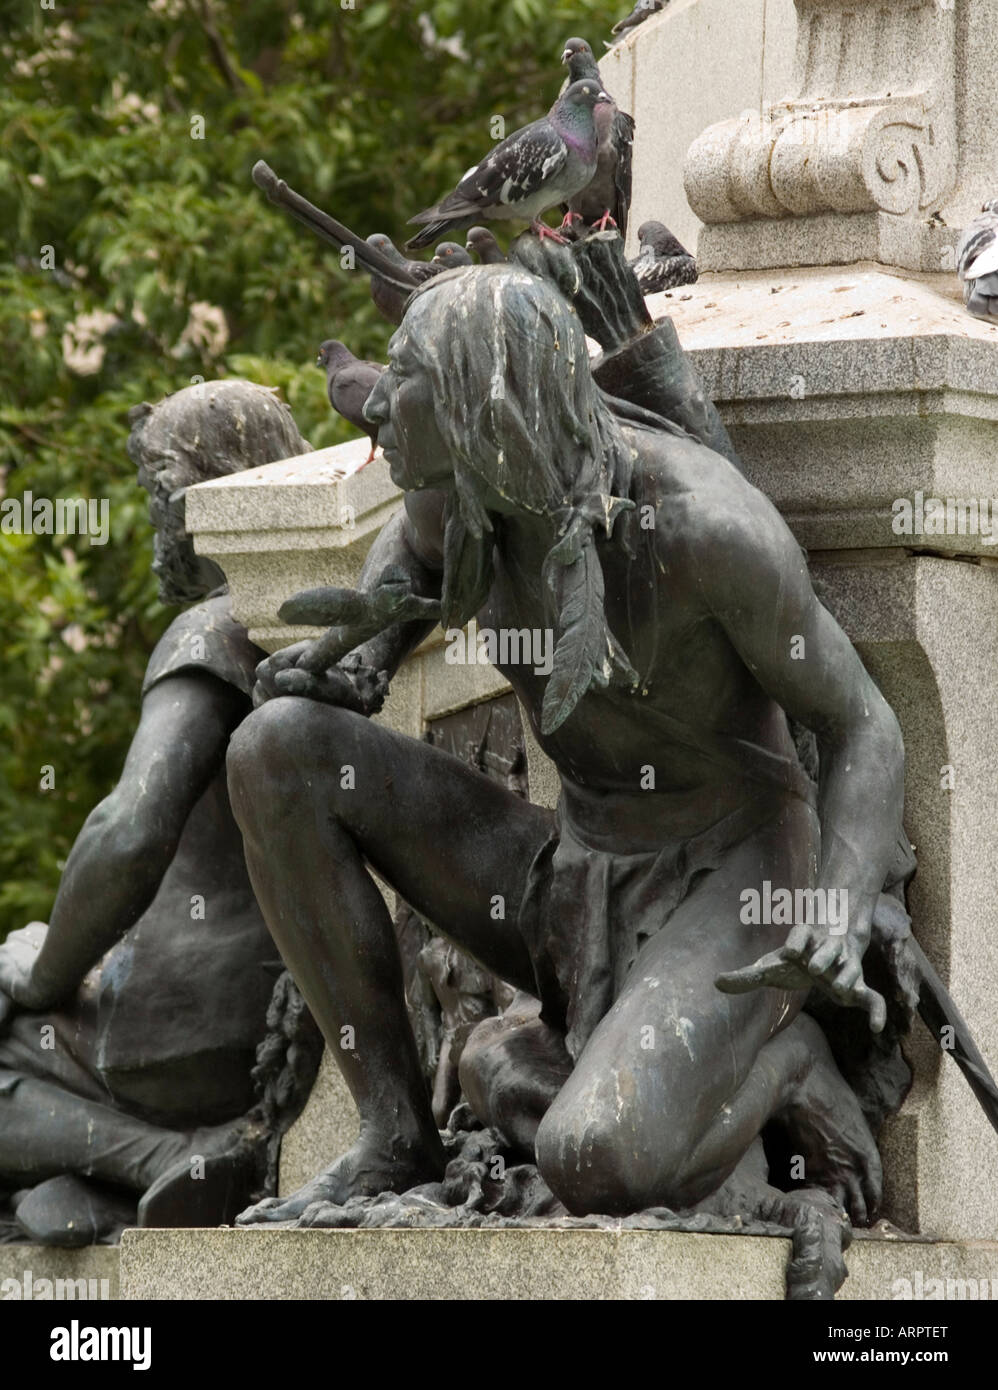 Close up on a statue of an Iriquois Brave as part of a fountain in Place D'Arms, Vieux Montreal Quebec Canada Stock Photo